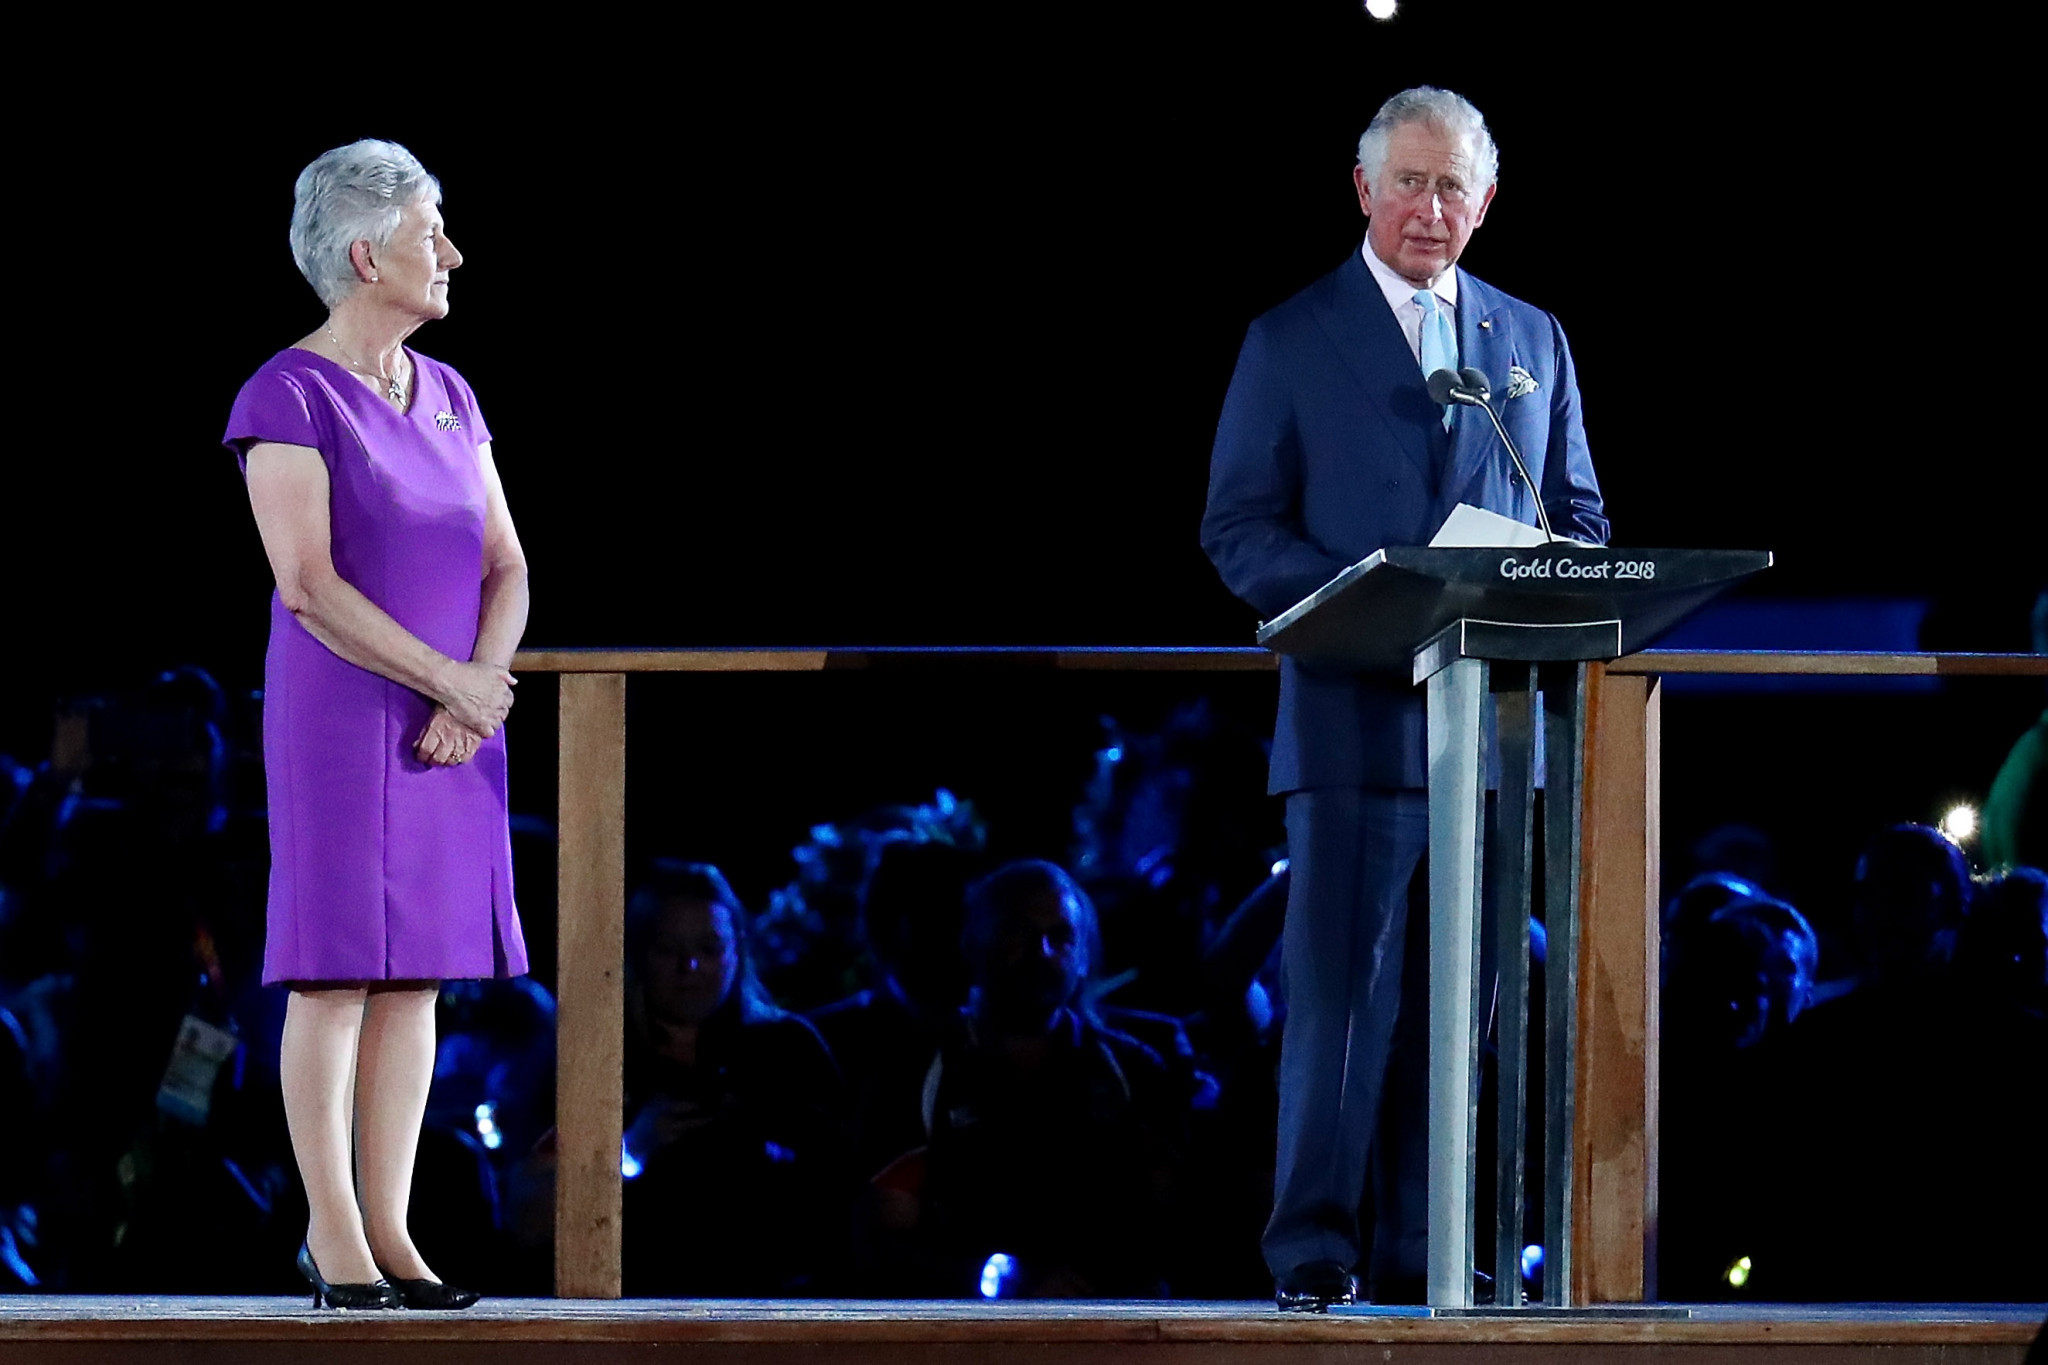 Prince Charles has opened two of the last three Commonwealth Games, including Gold Coast 2018 ©Getty Images